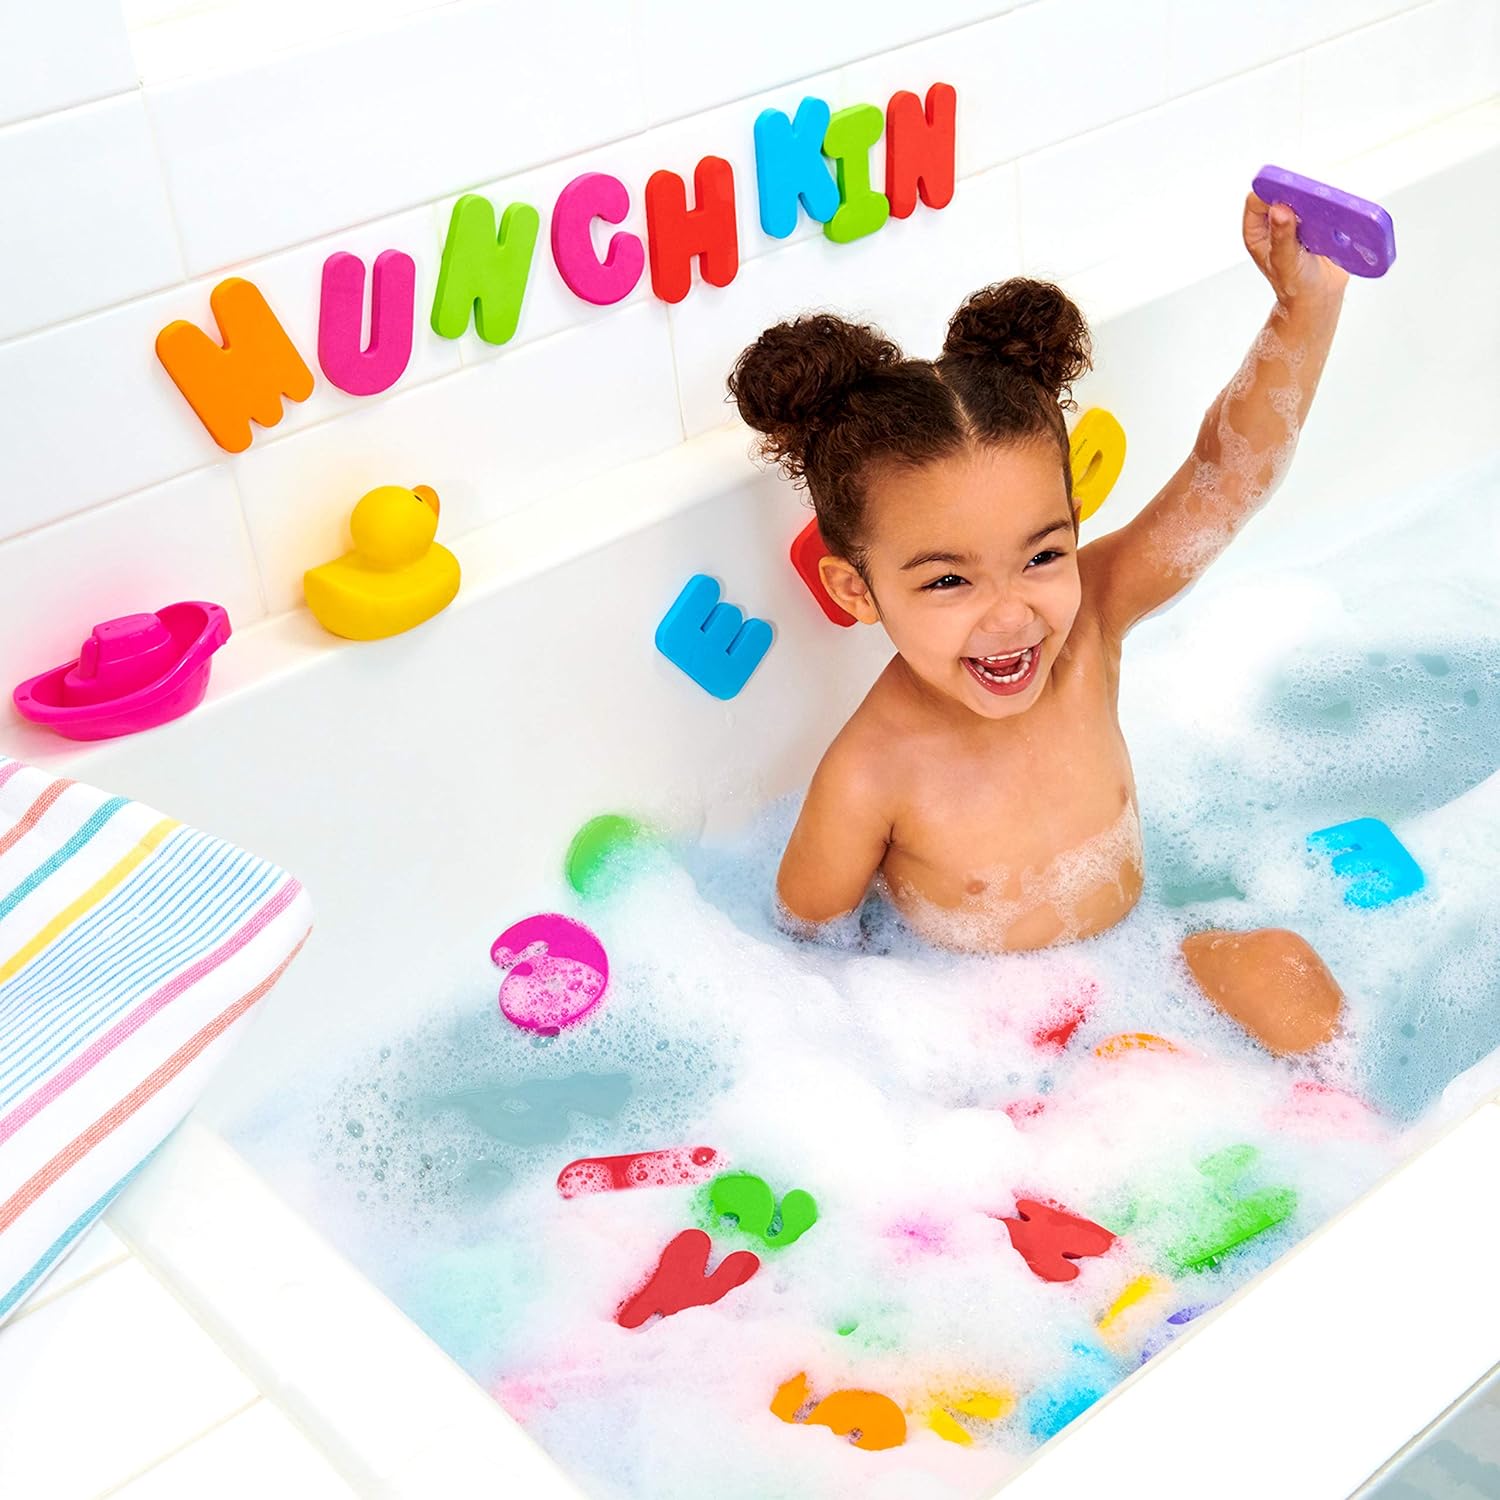 Munchkin® Learn™ Bath Letters and Numbers 36pc Toddler Bath Toy